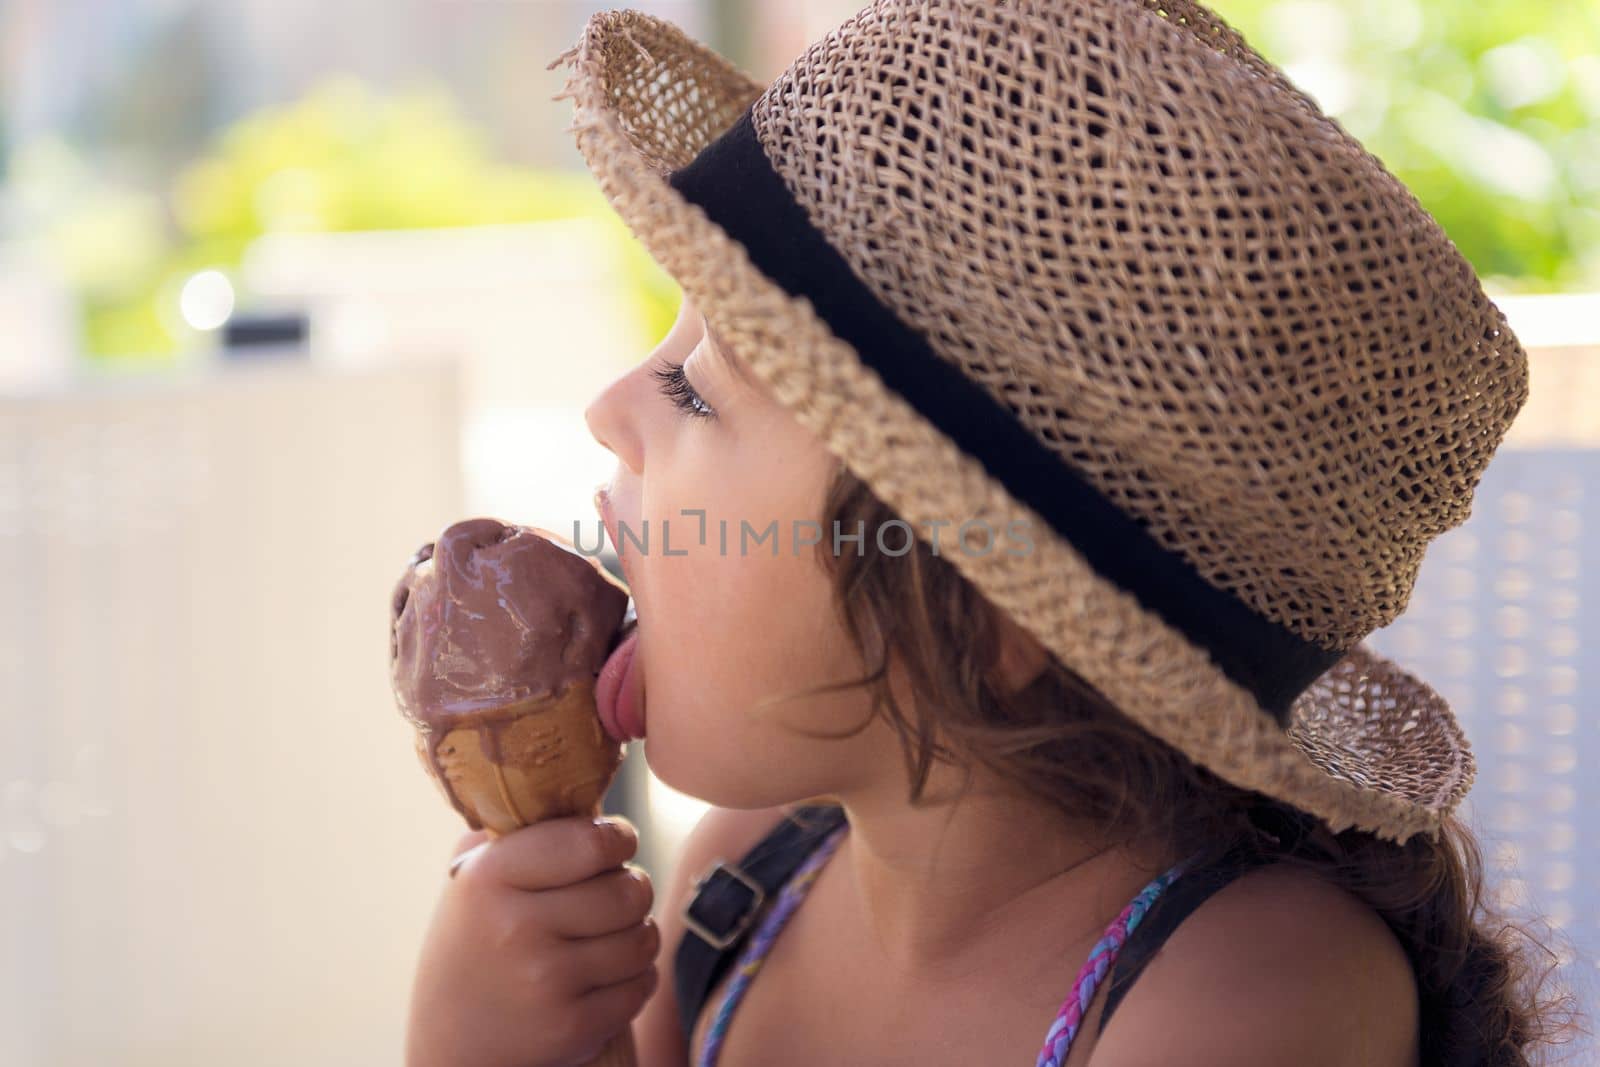 Little girl with a straw hat and a summer dress enjoys the summer heat eating a refreshing cone of chocolate ice cream, it melts in her hand while she licks it with her tongue